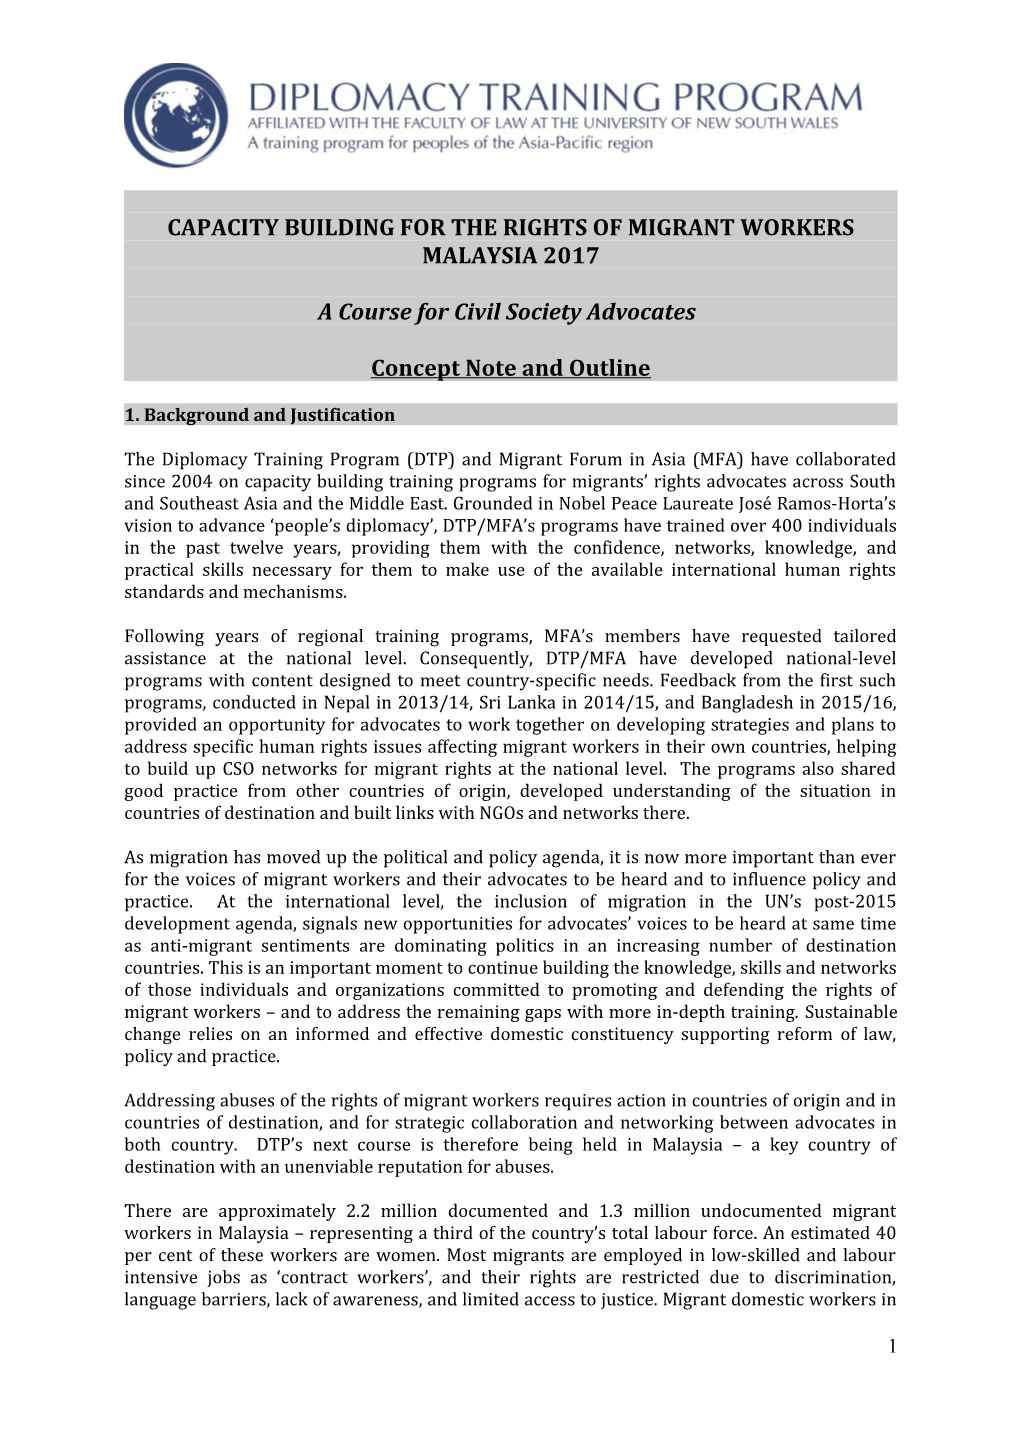 Capacity Building for the Rights of Migrant Workers